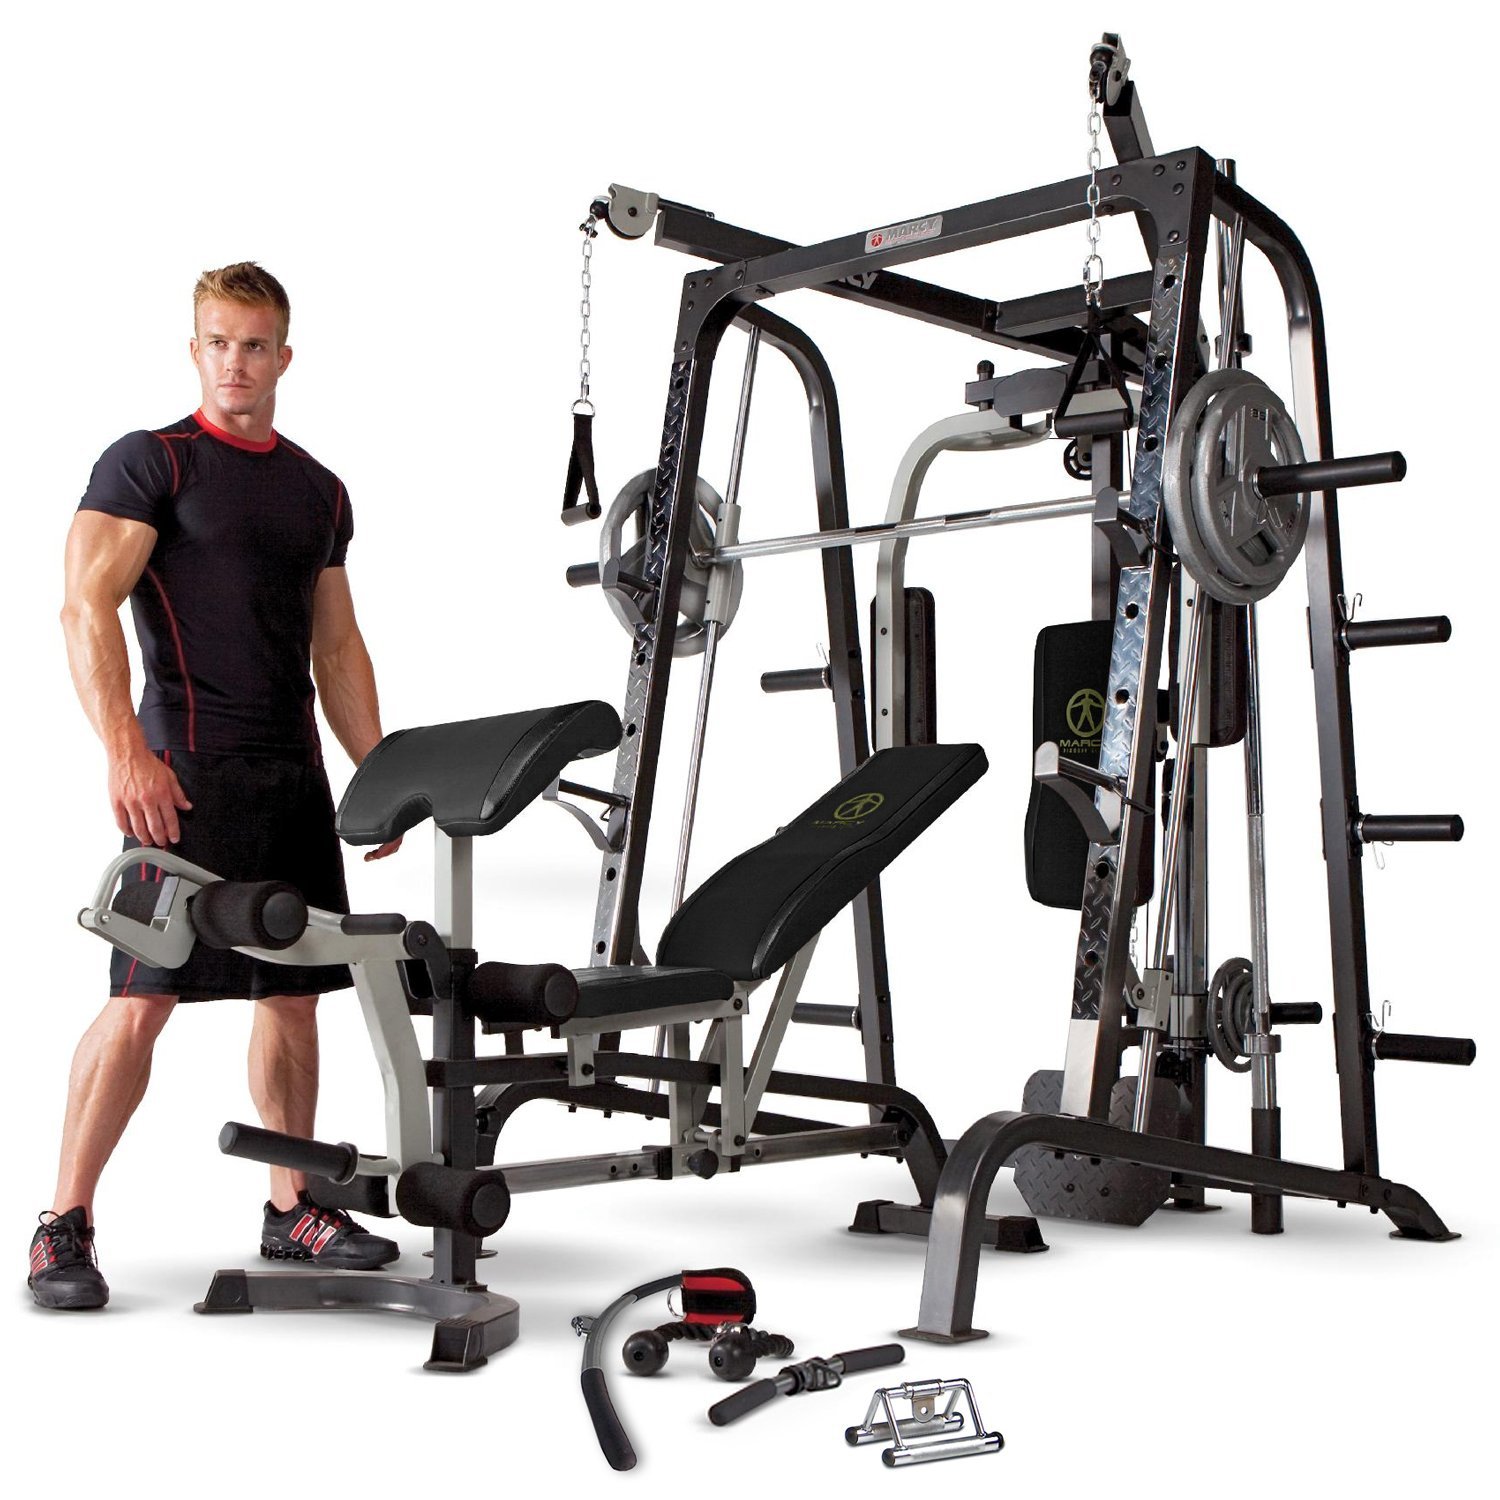 Small Home Gym Equipment Uk - Gym Small Room Equipment Gyms Wall ...